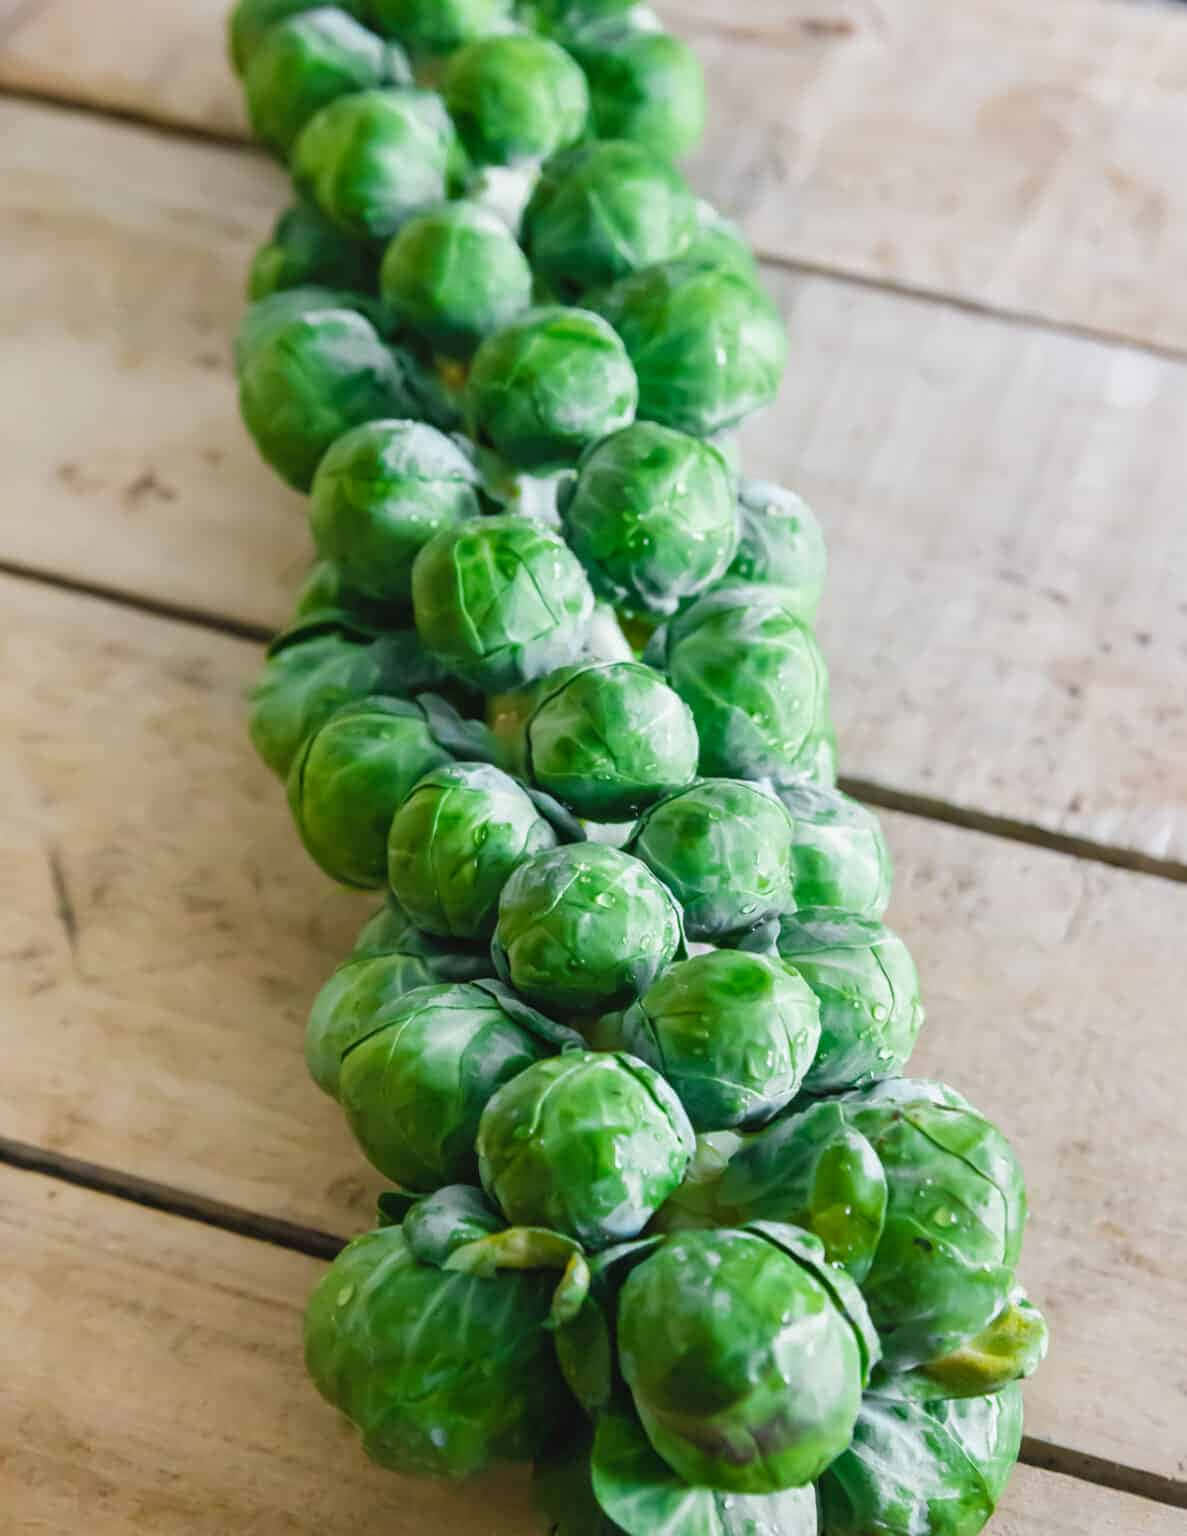 Brussel Sprouts On A Wooden Table